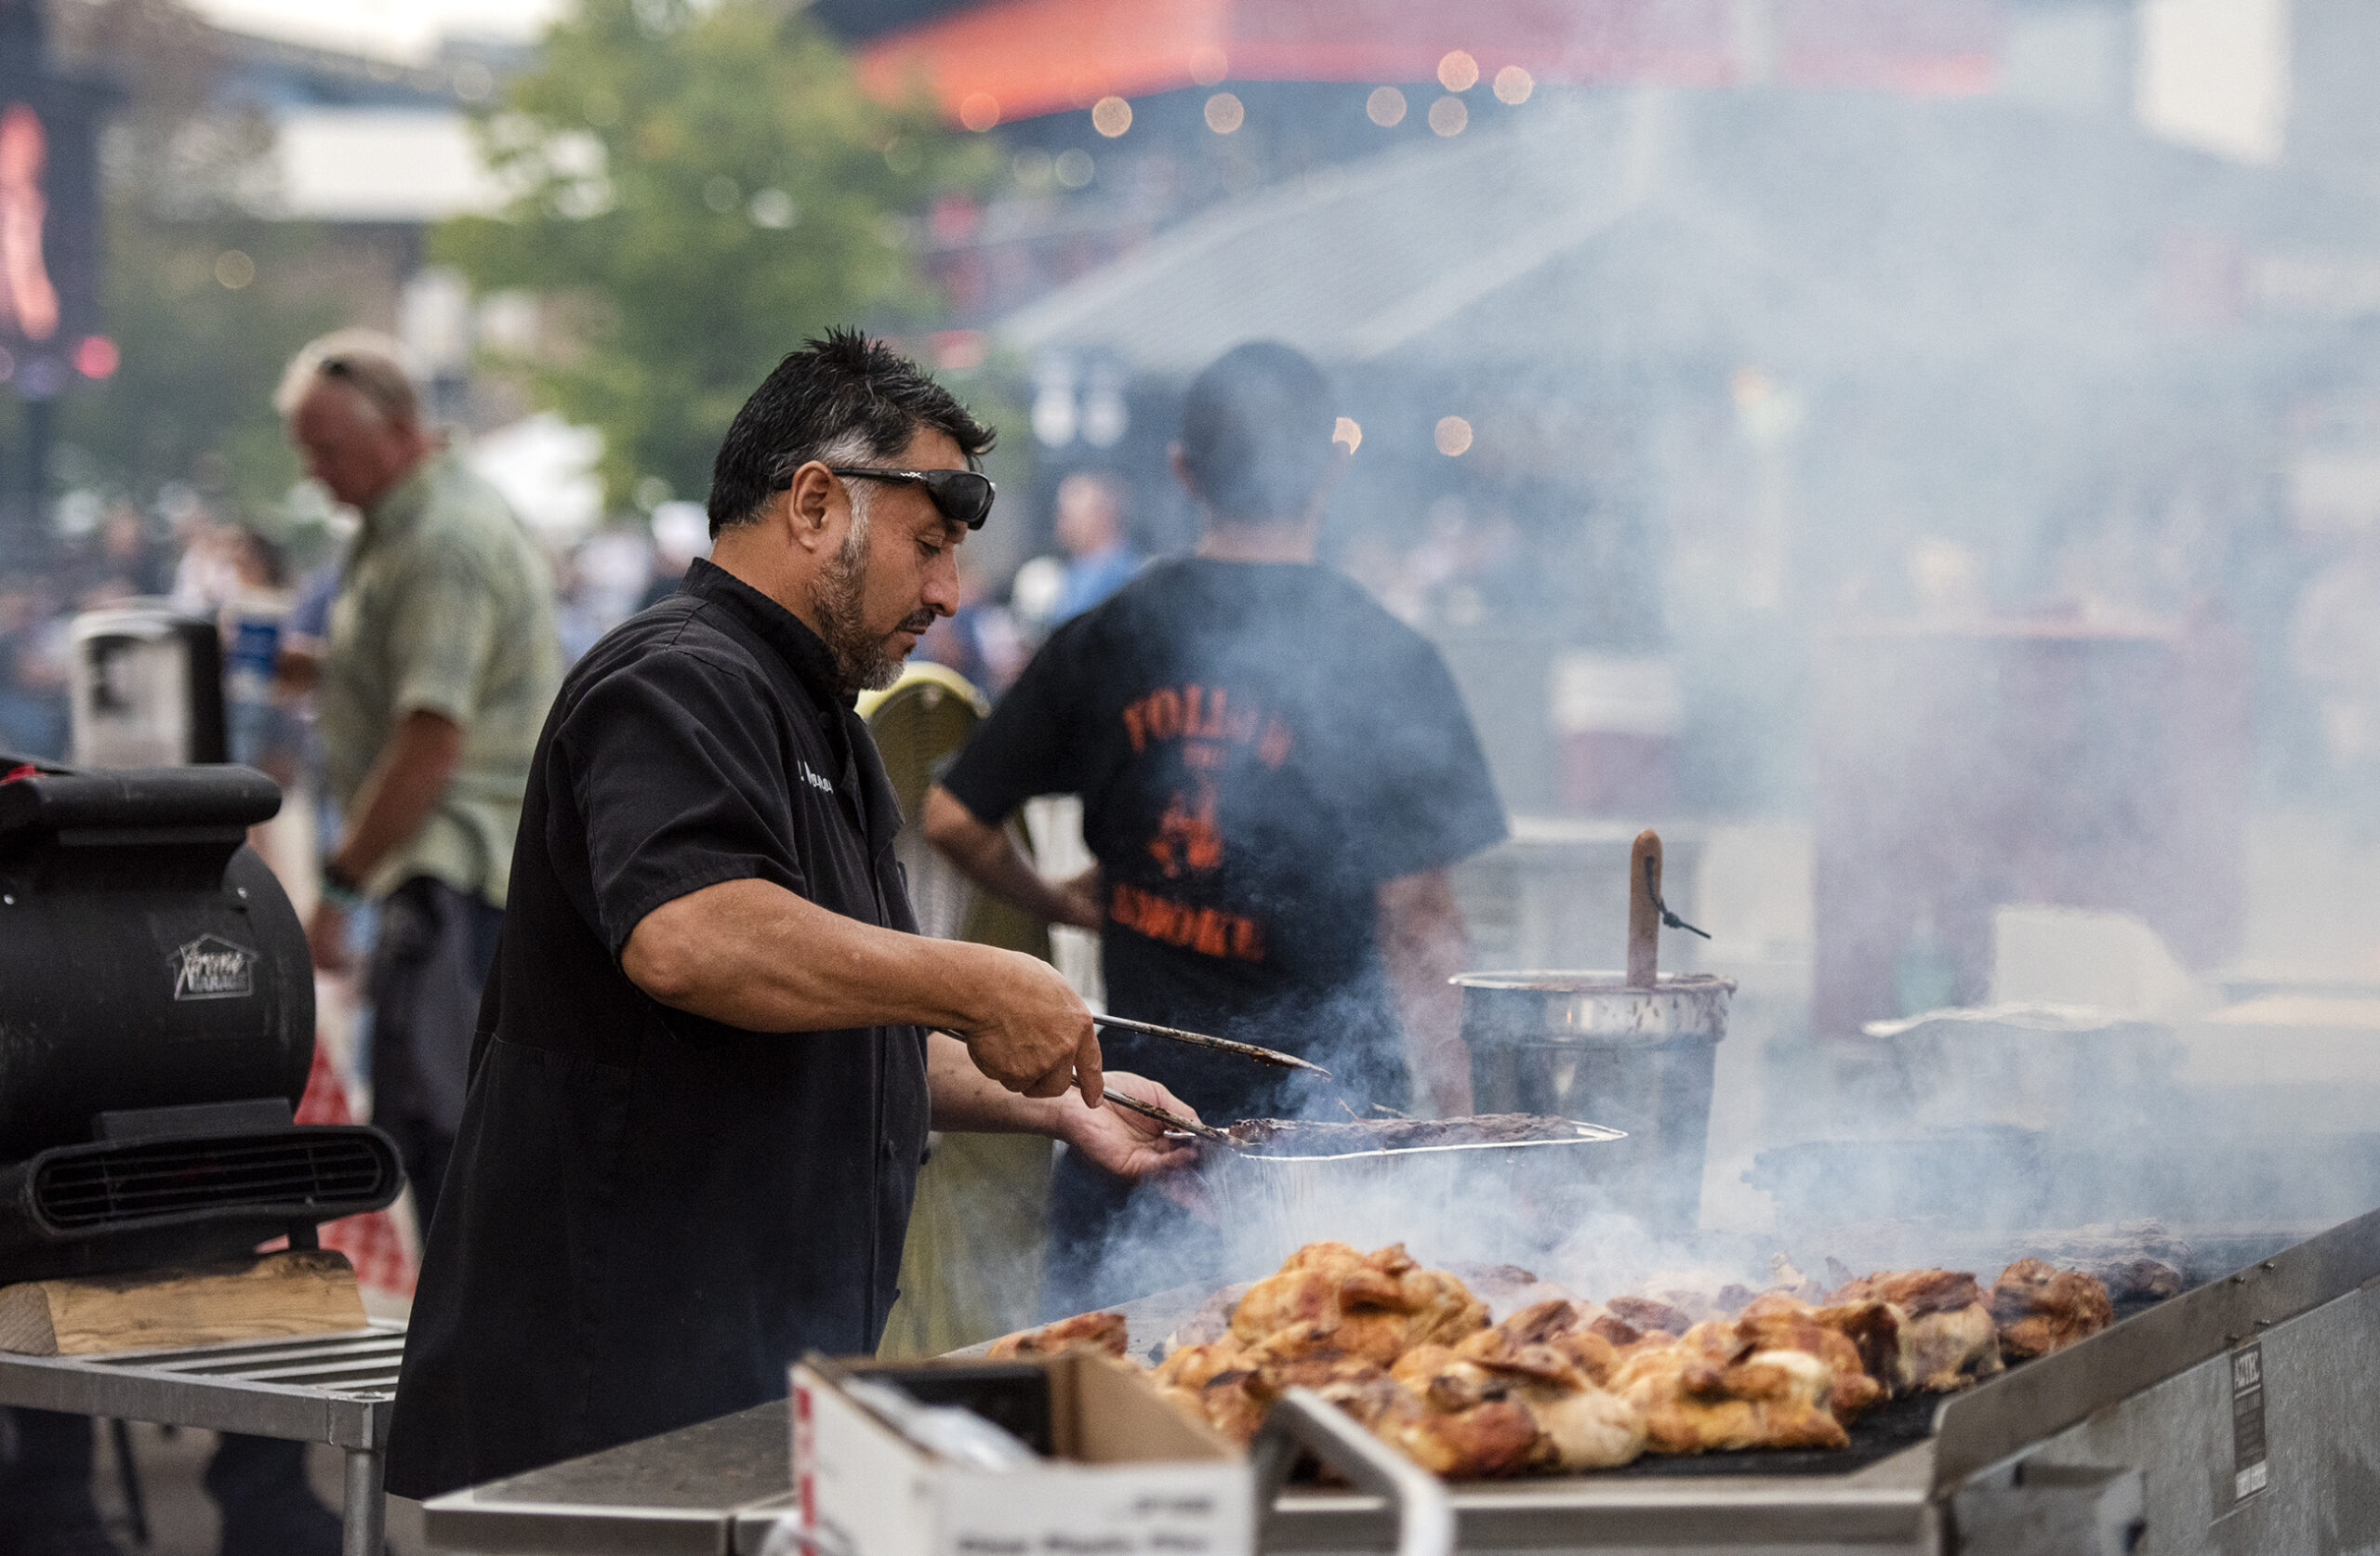 Smoke fills the air as a man prepares chicken on a large, flat grill.